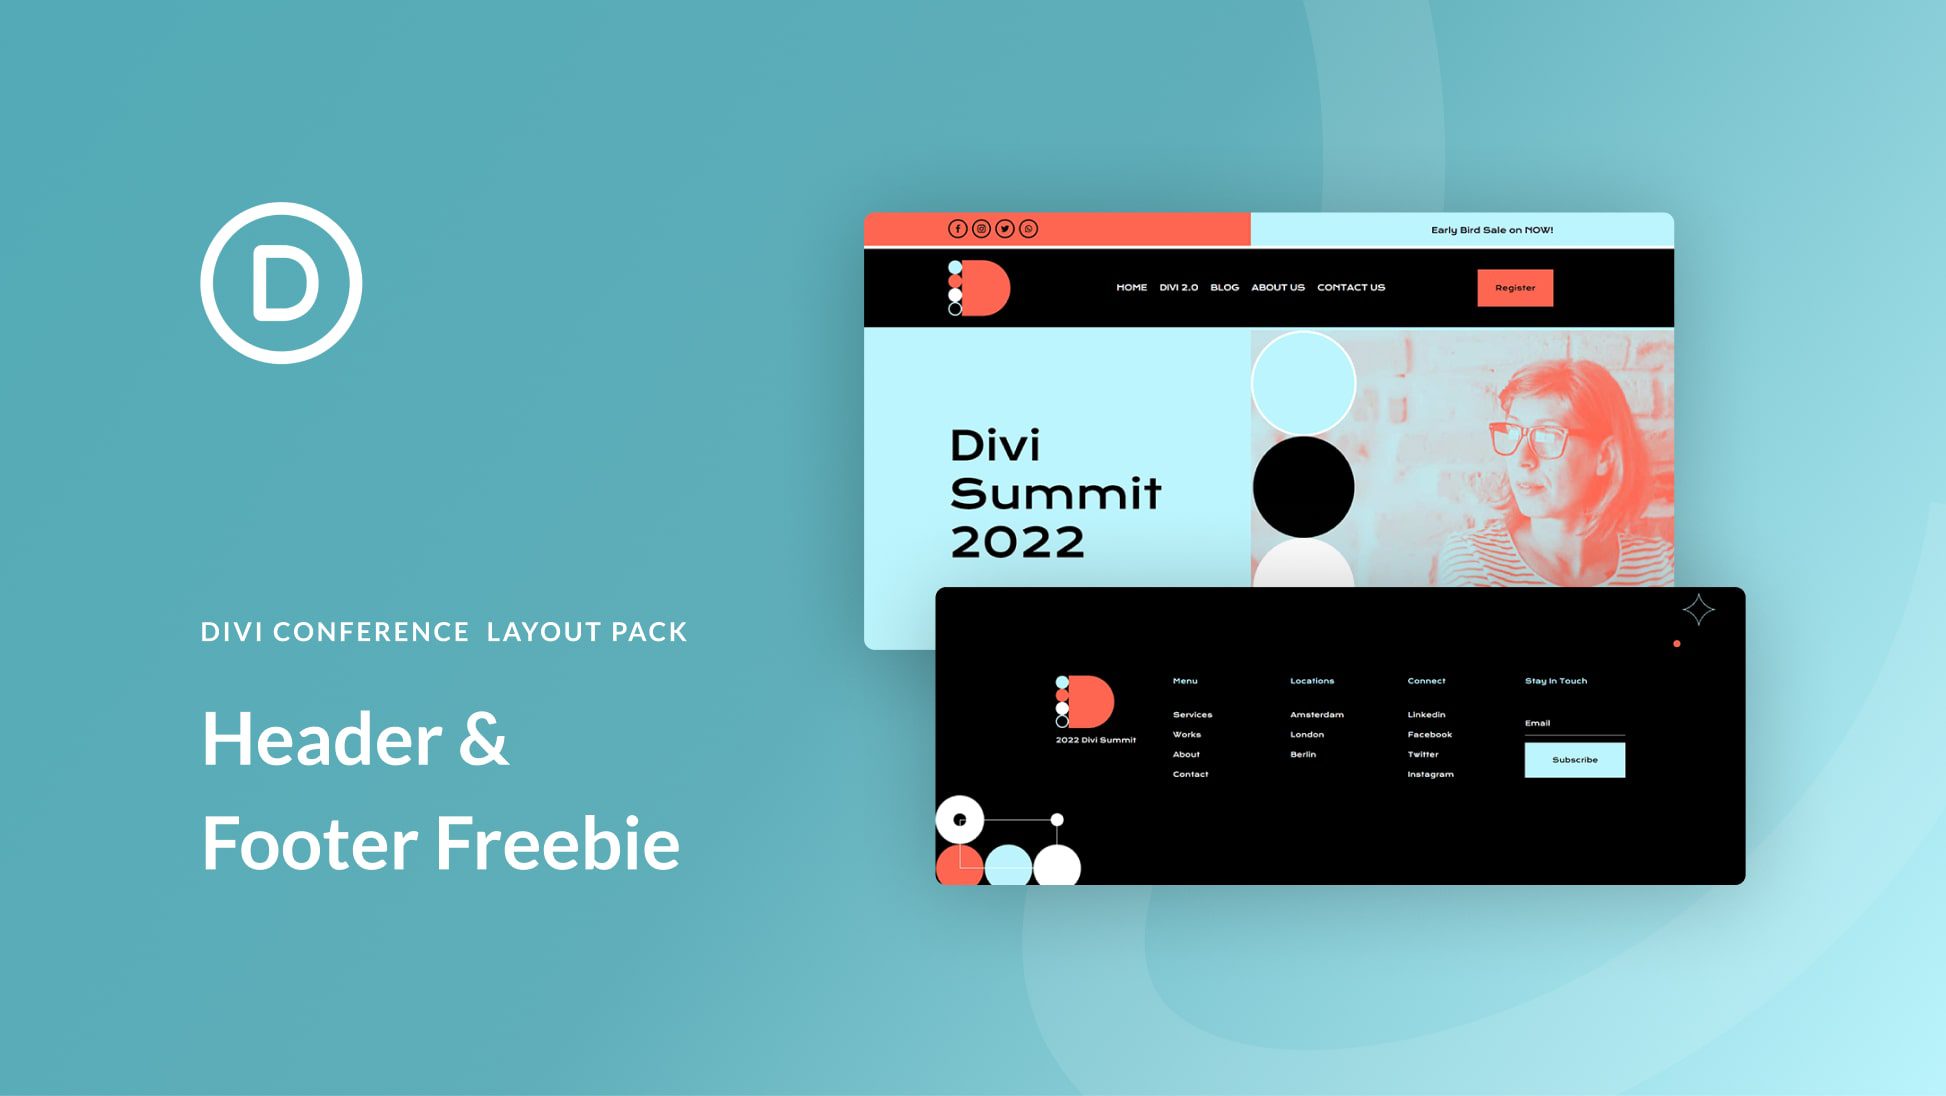 Download a FREE Header & Footer for Divi’s Conference Layout Pack